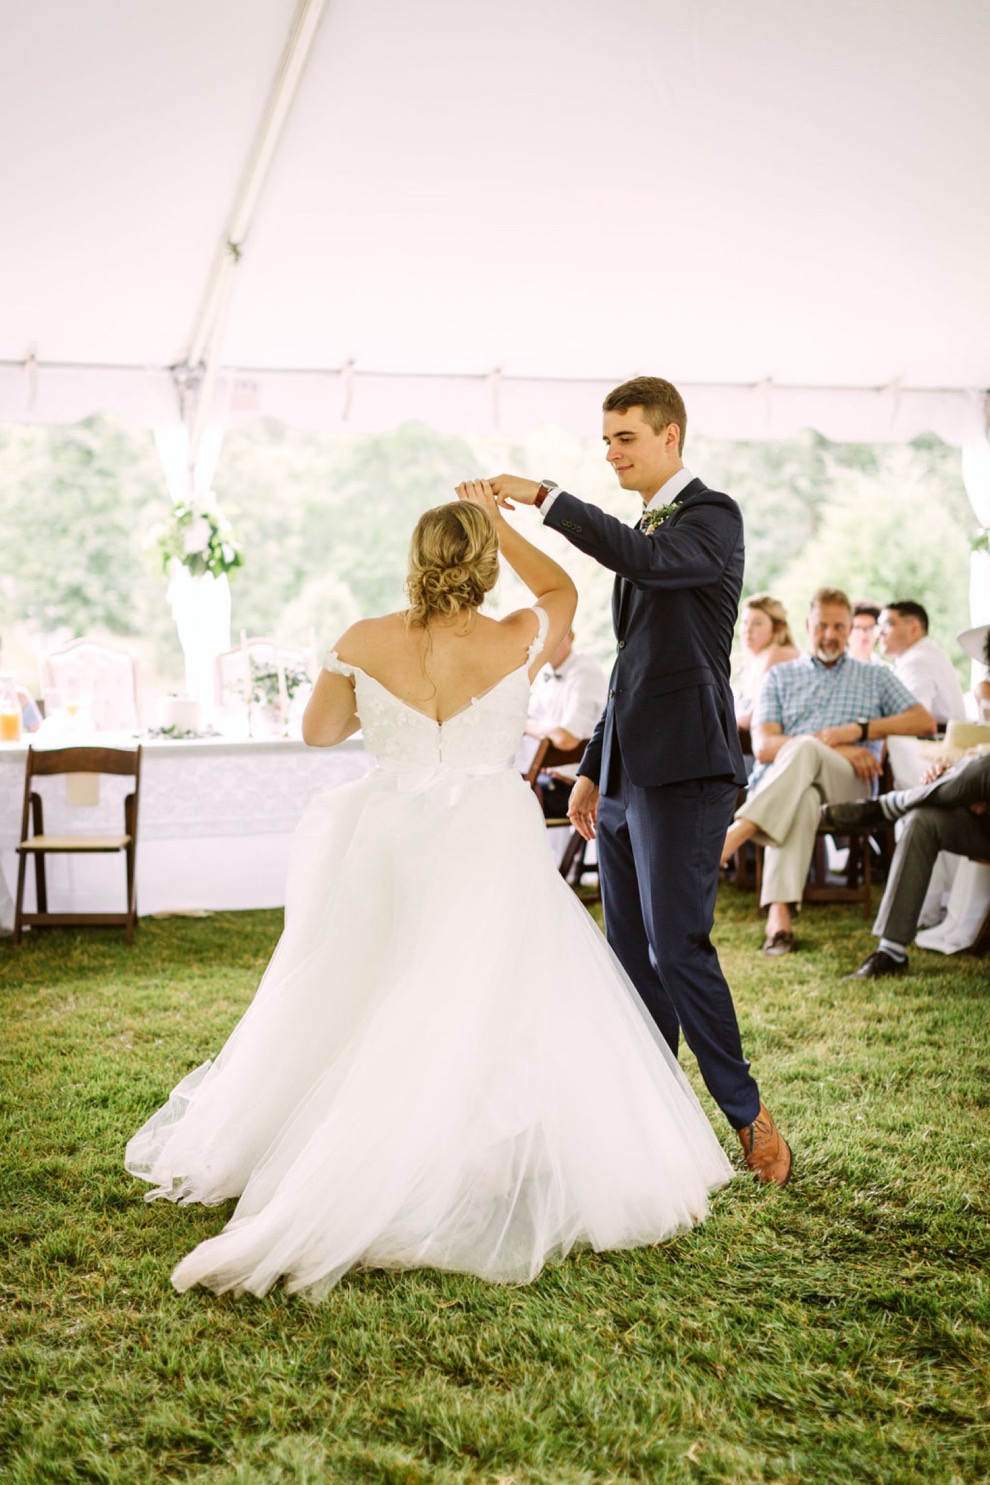 bride and groom first dance on grass under large, white tent during their backyard wedding reception